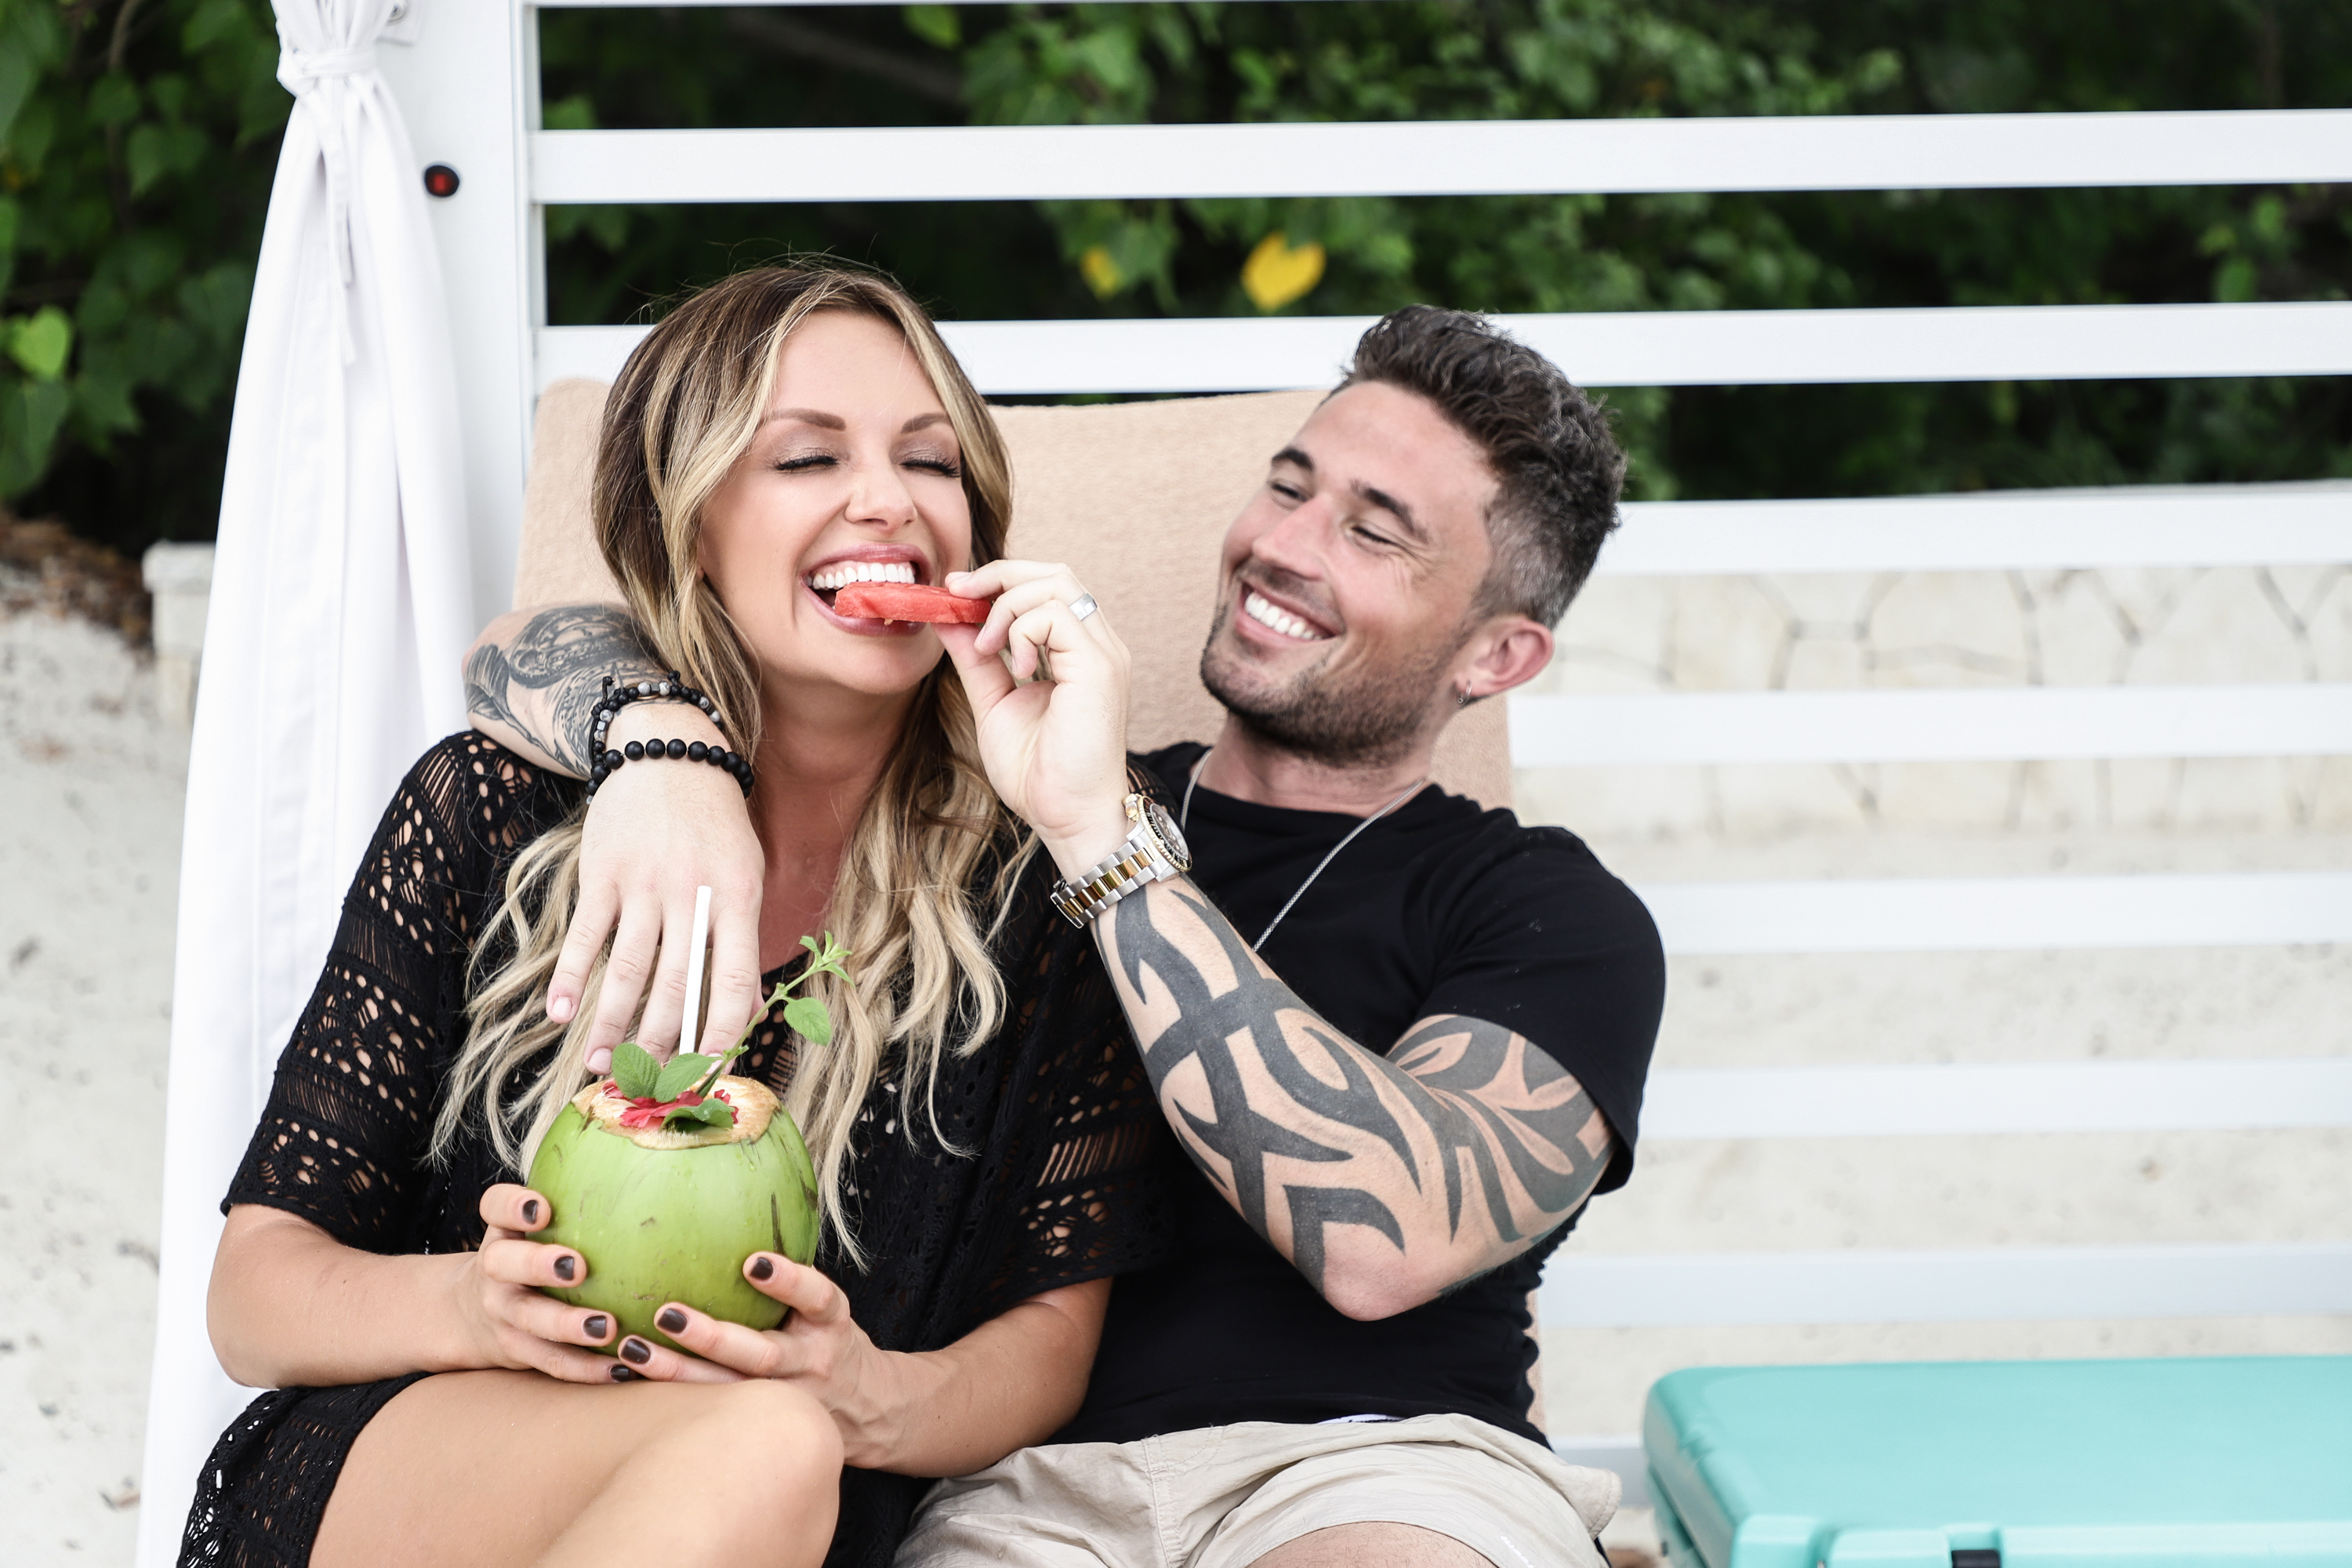 Michael Ray and Carly Pearce At Sandals South Coast on December 16, 2019, in Whitehouse, Jamaica. | Source: Getty Images